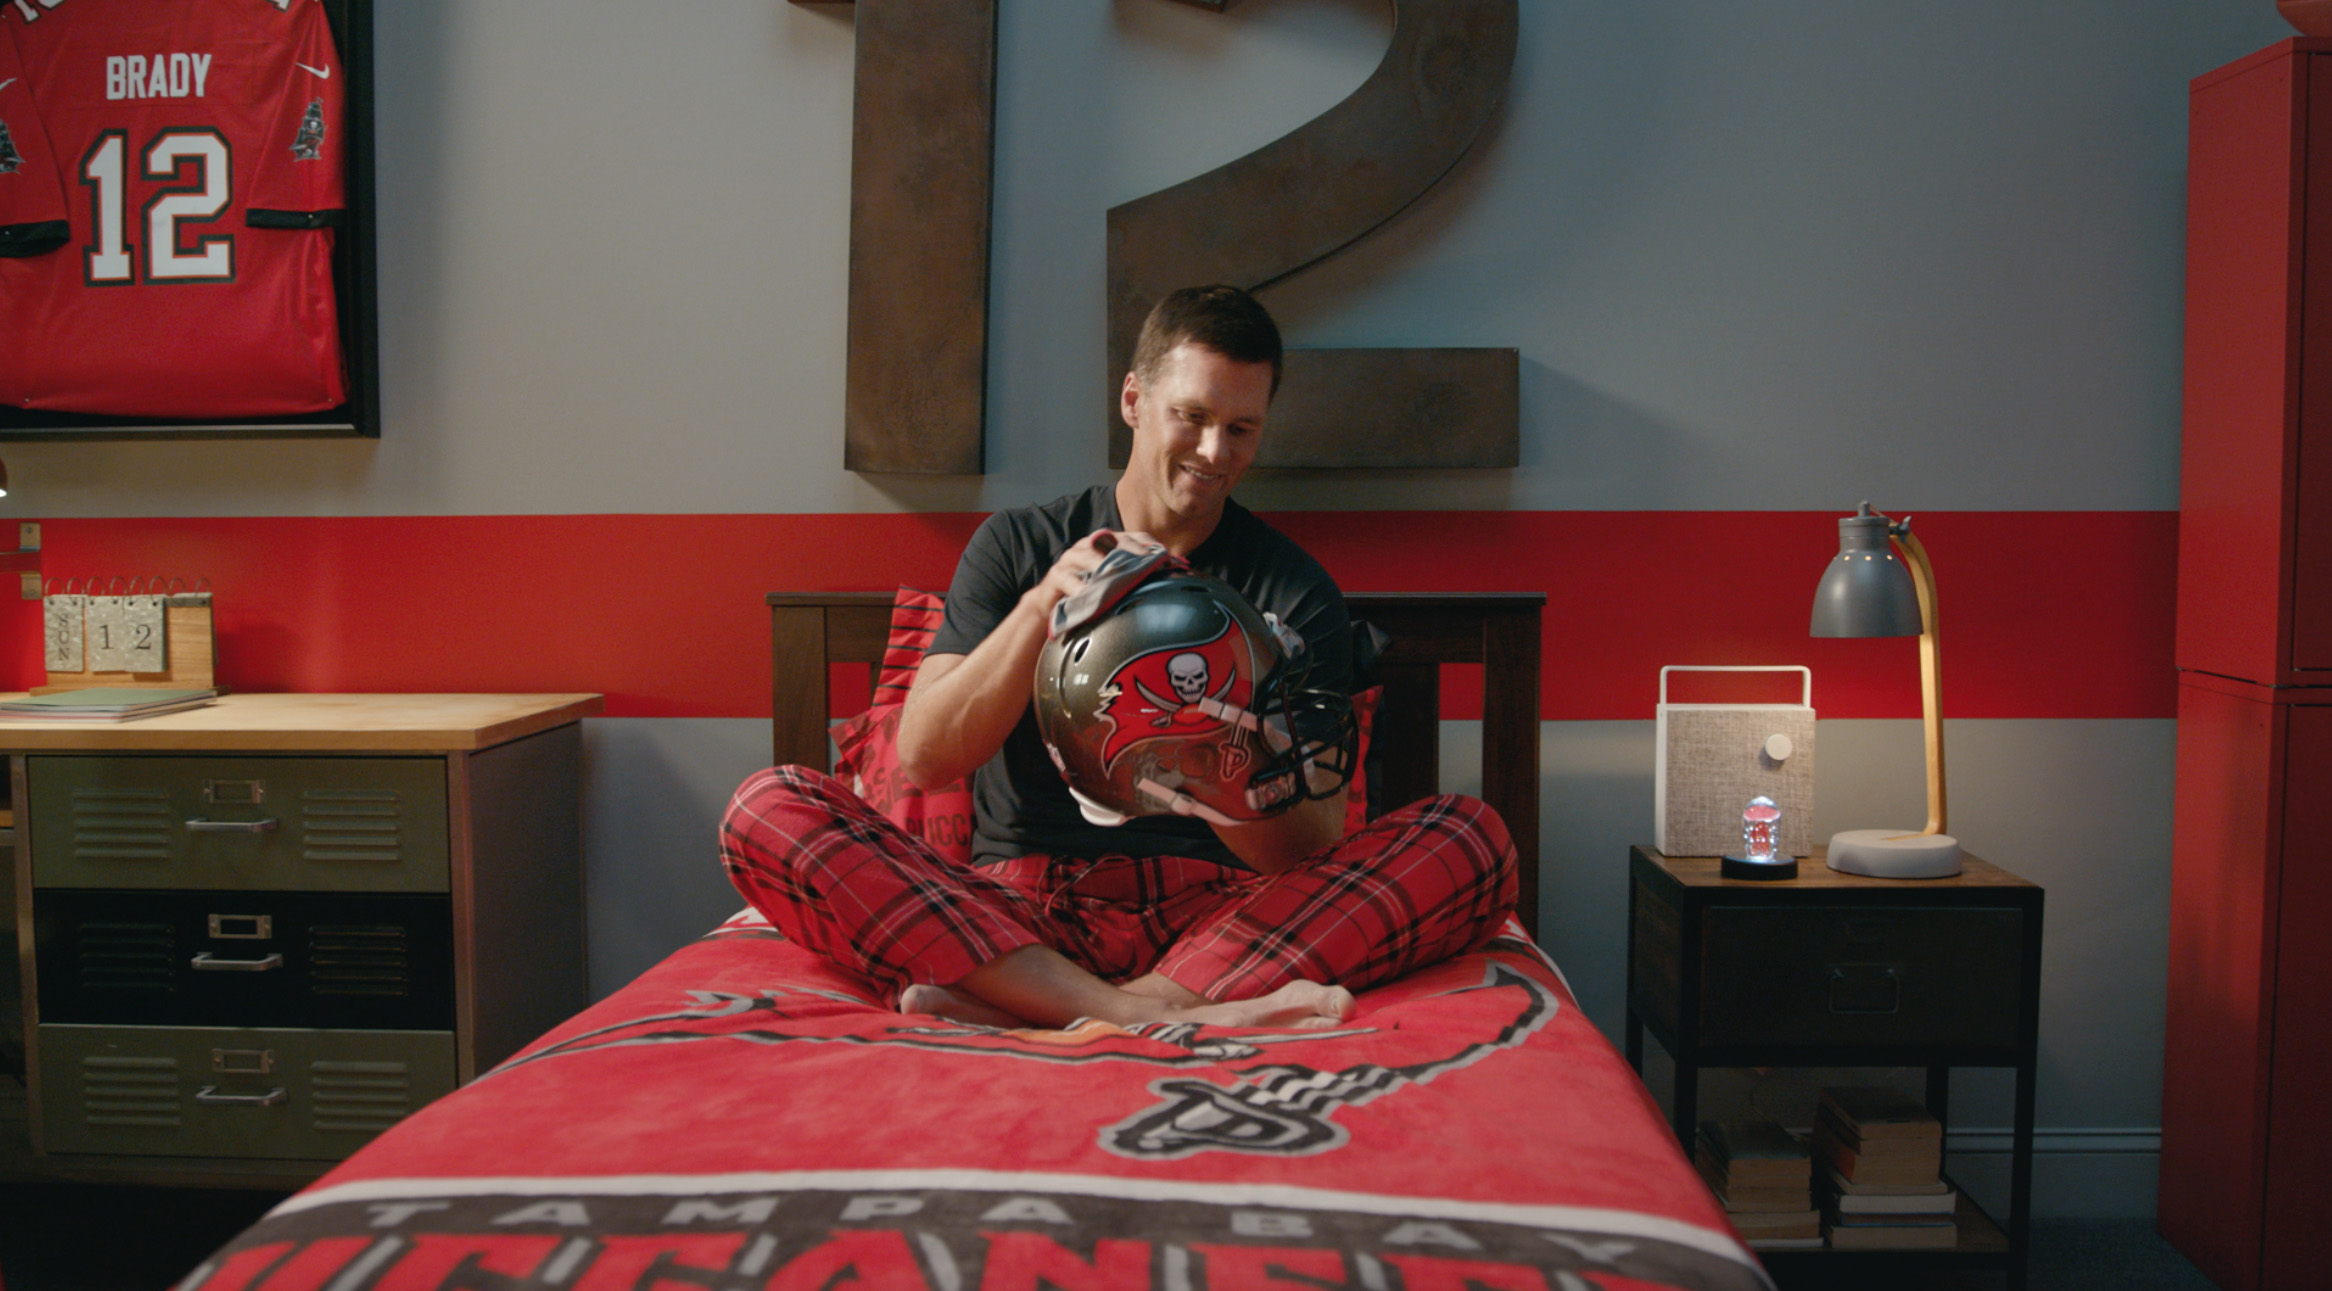 Brady sitting on a bed with football helmet in hand